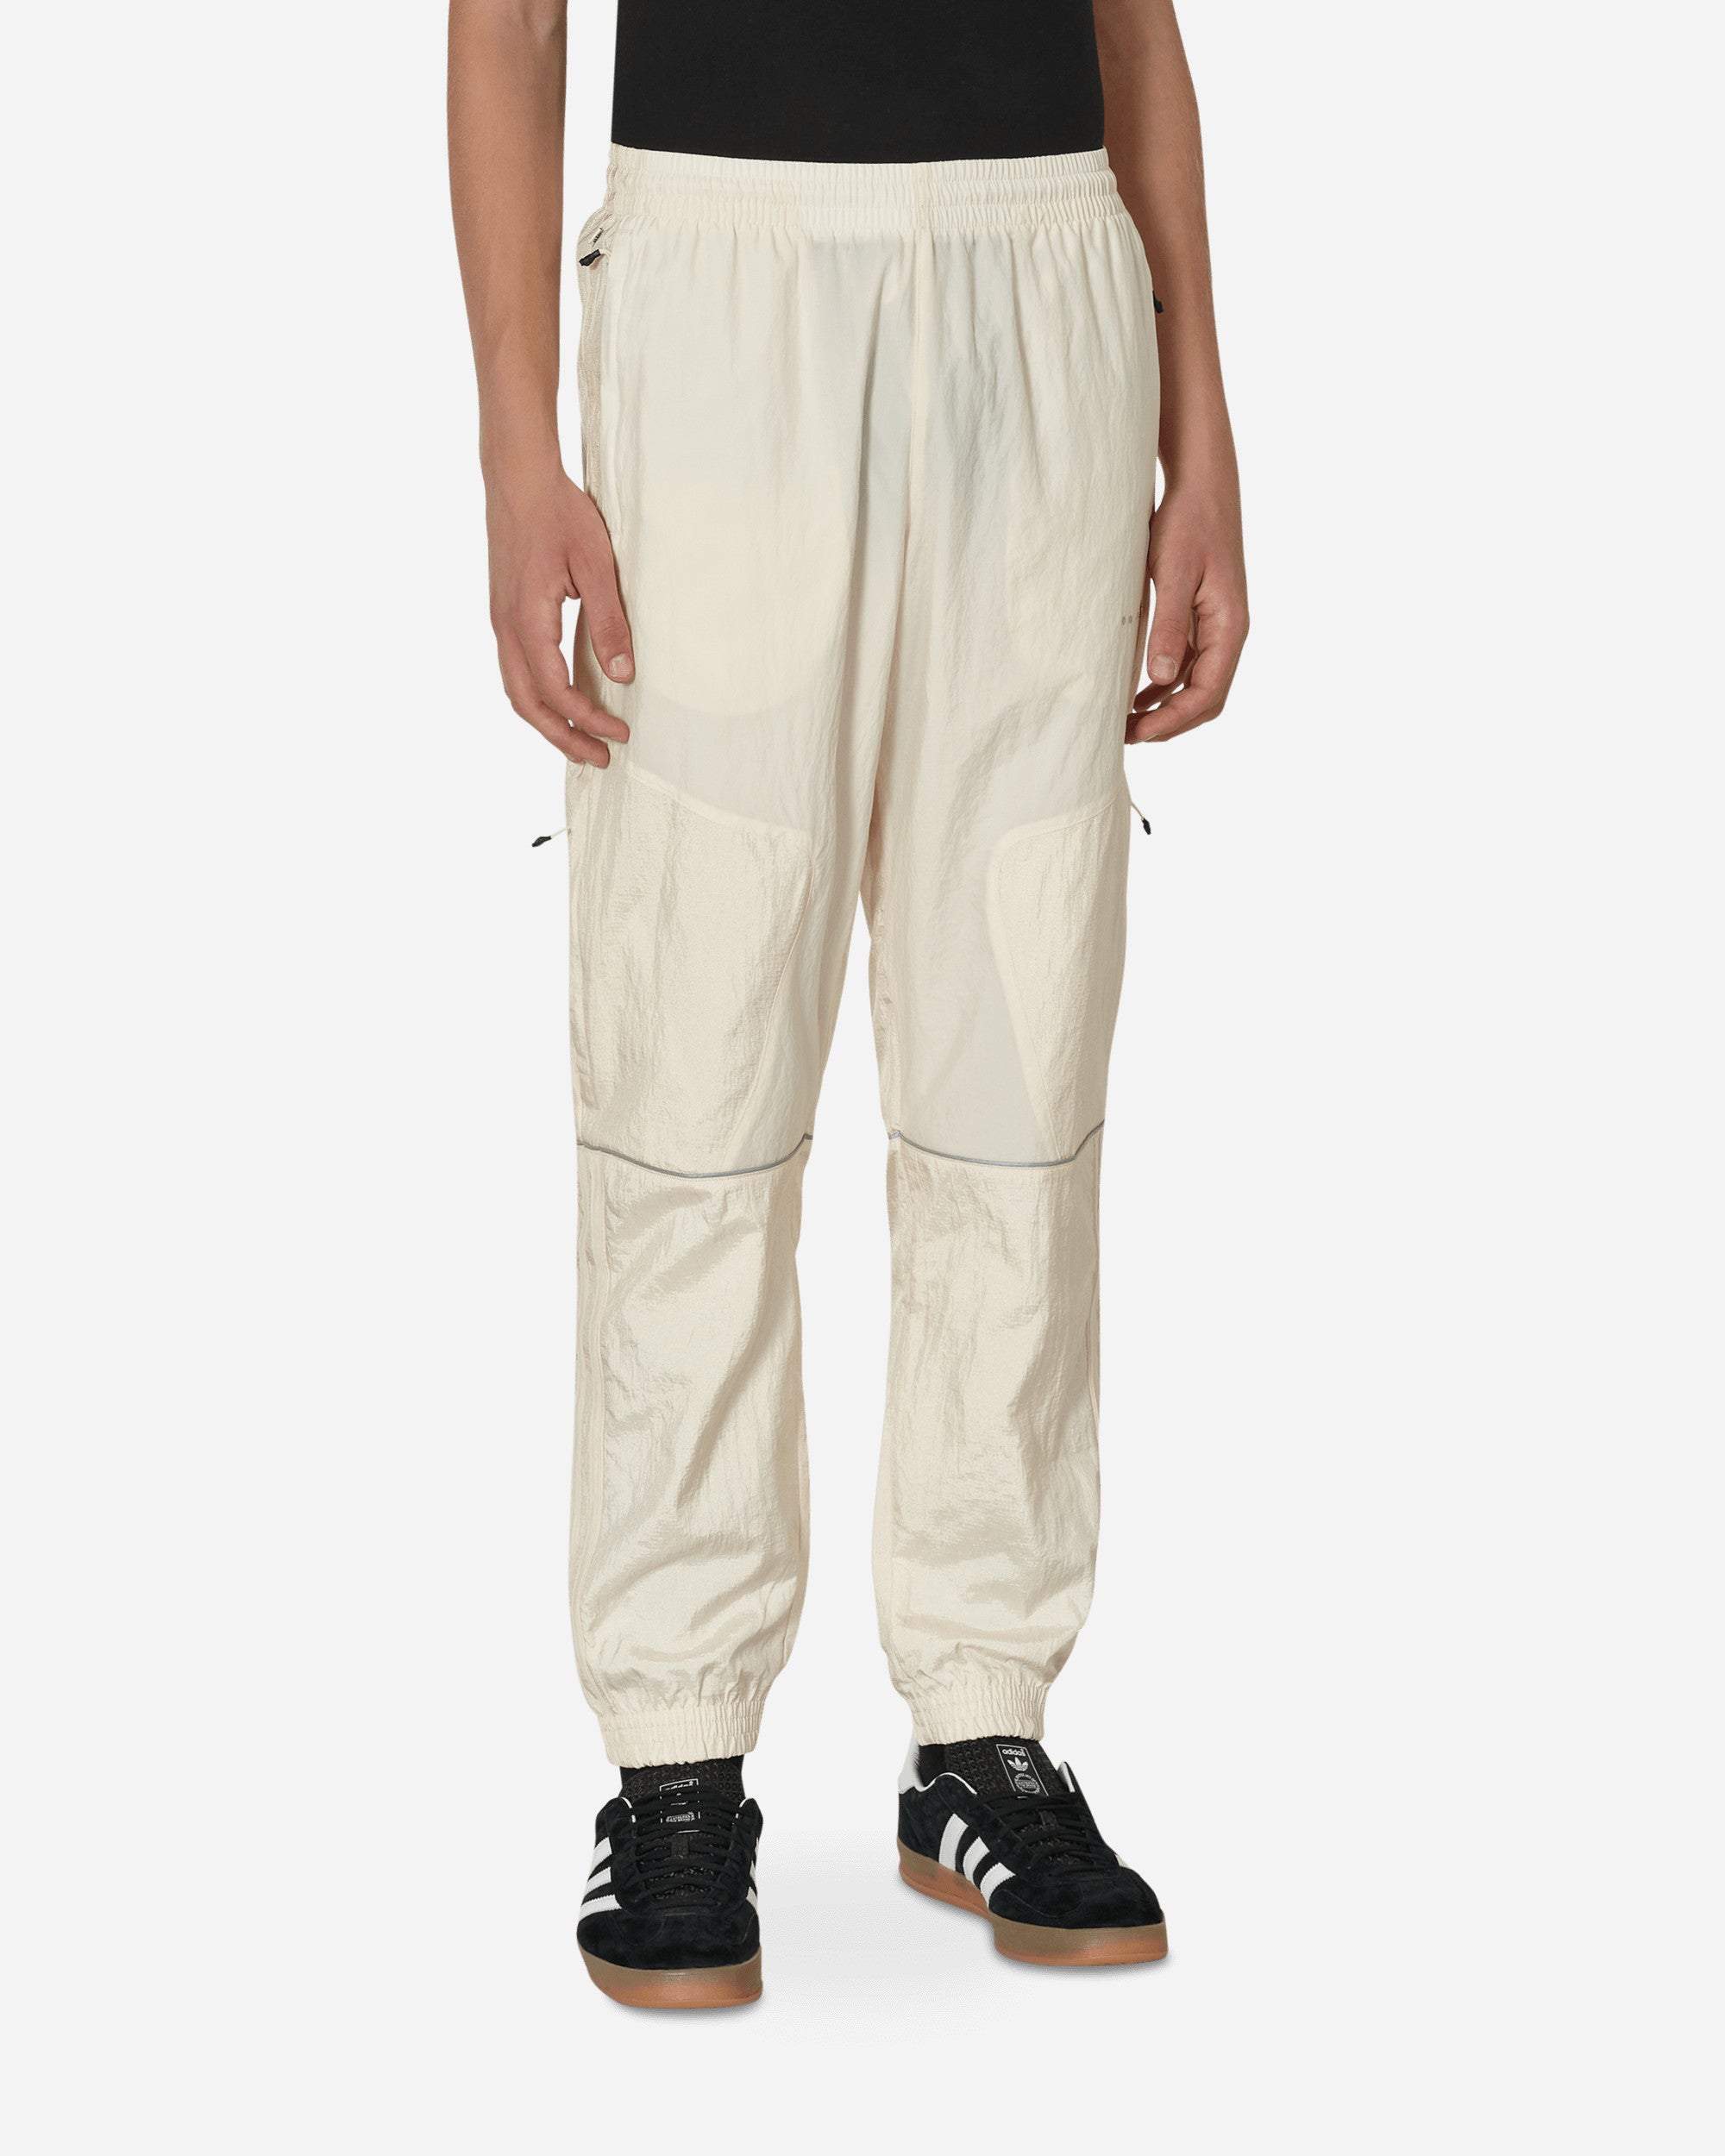 Reveal Material Mix Track Pants White